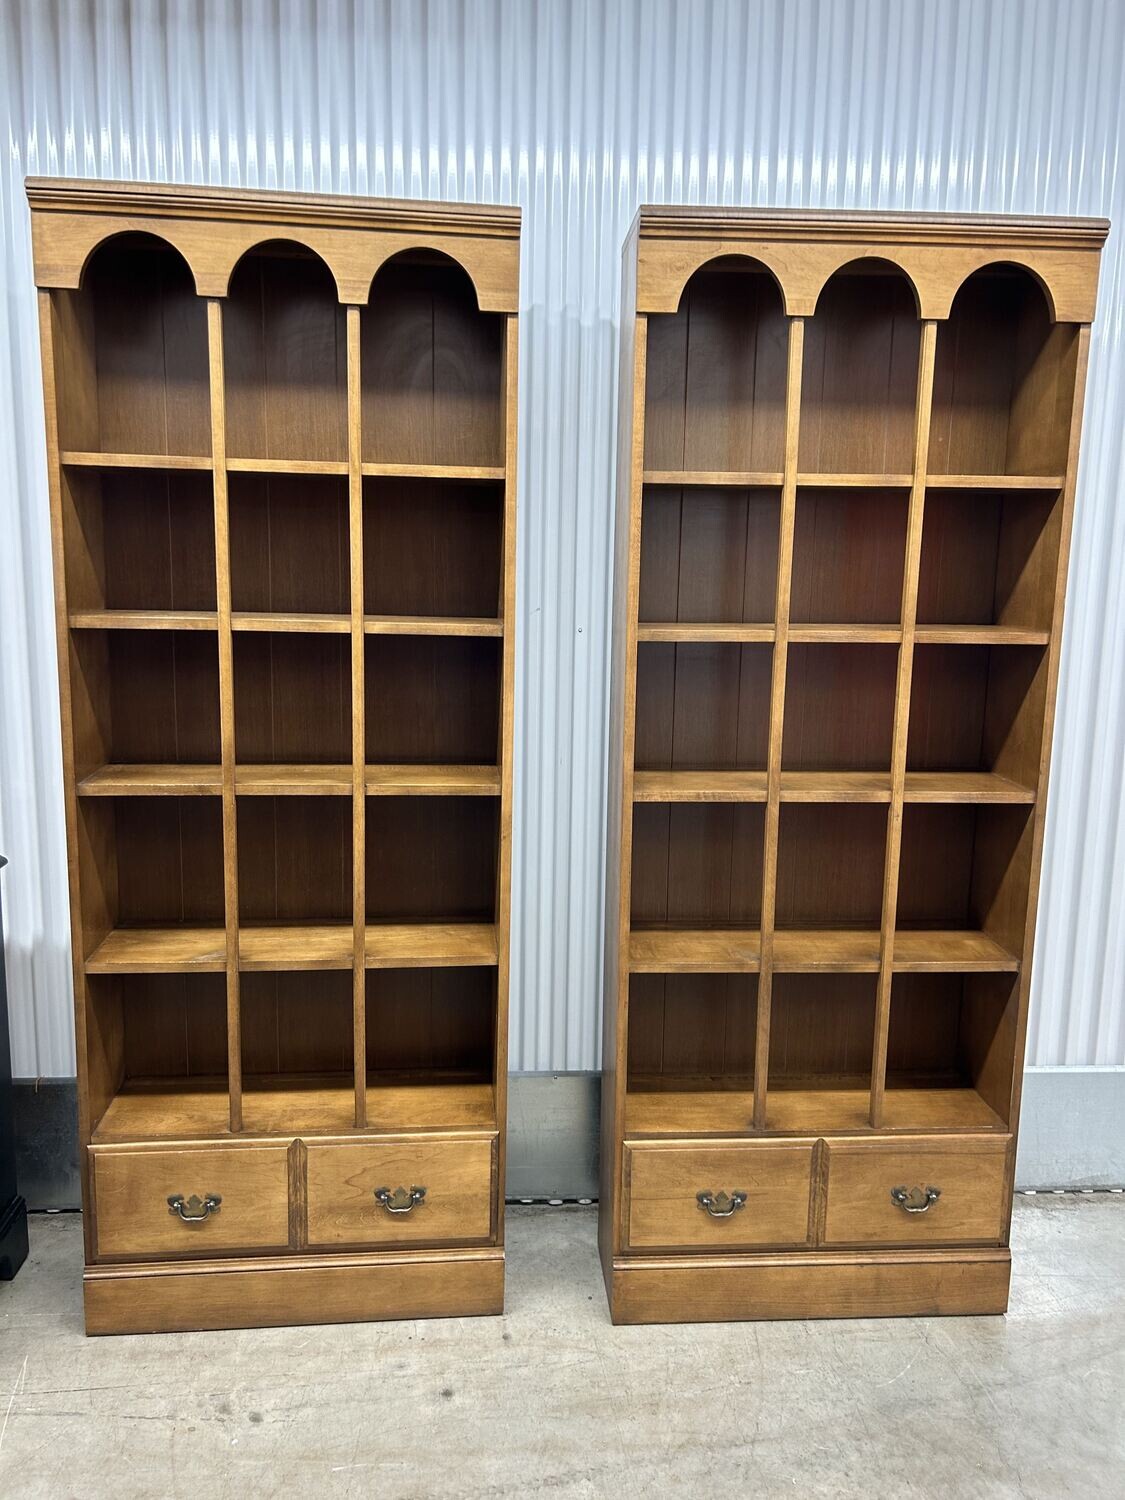 Vintage Maple Bookcase with arch & grid design, EACH #2103 ** 3 days to sell, full price